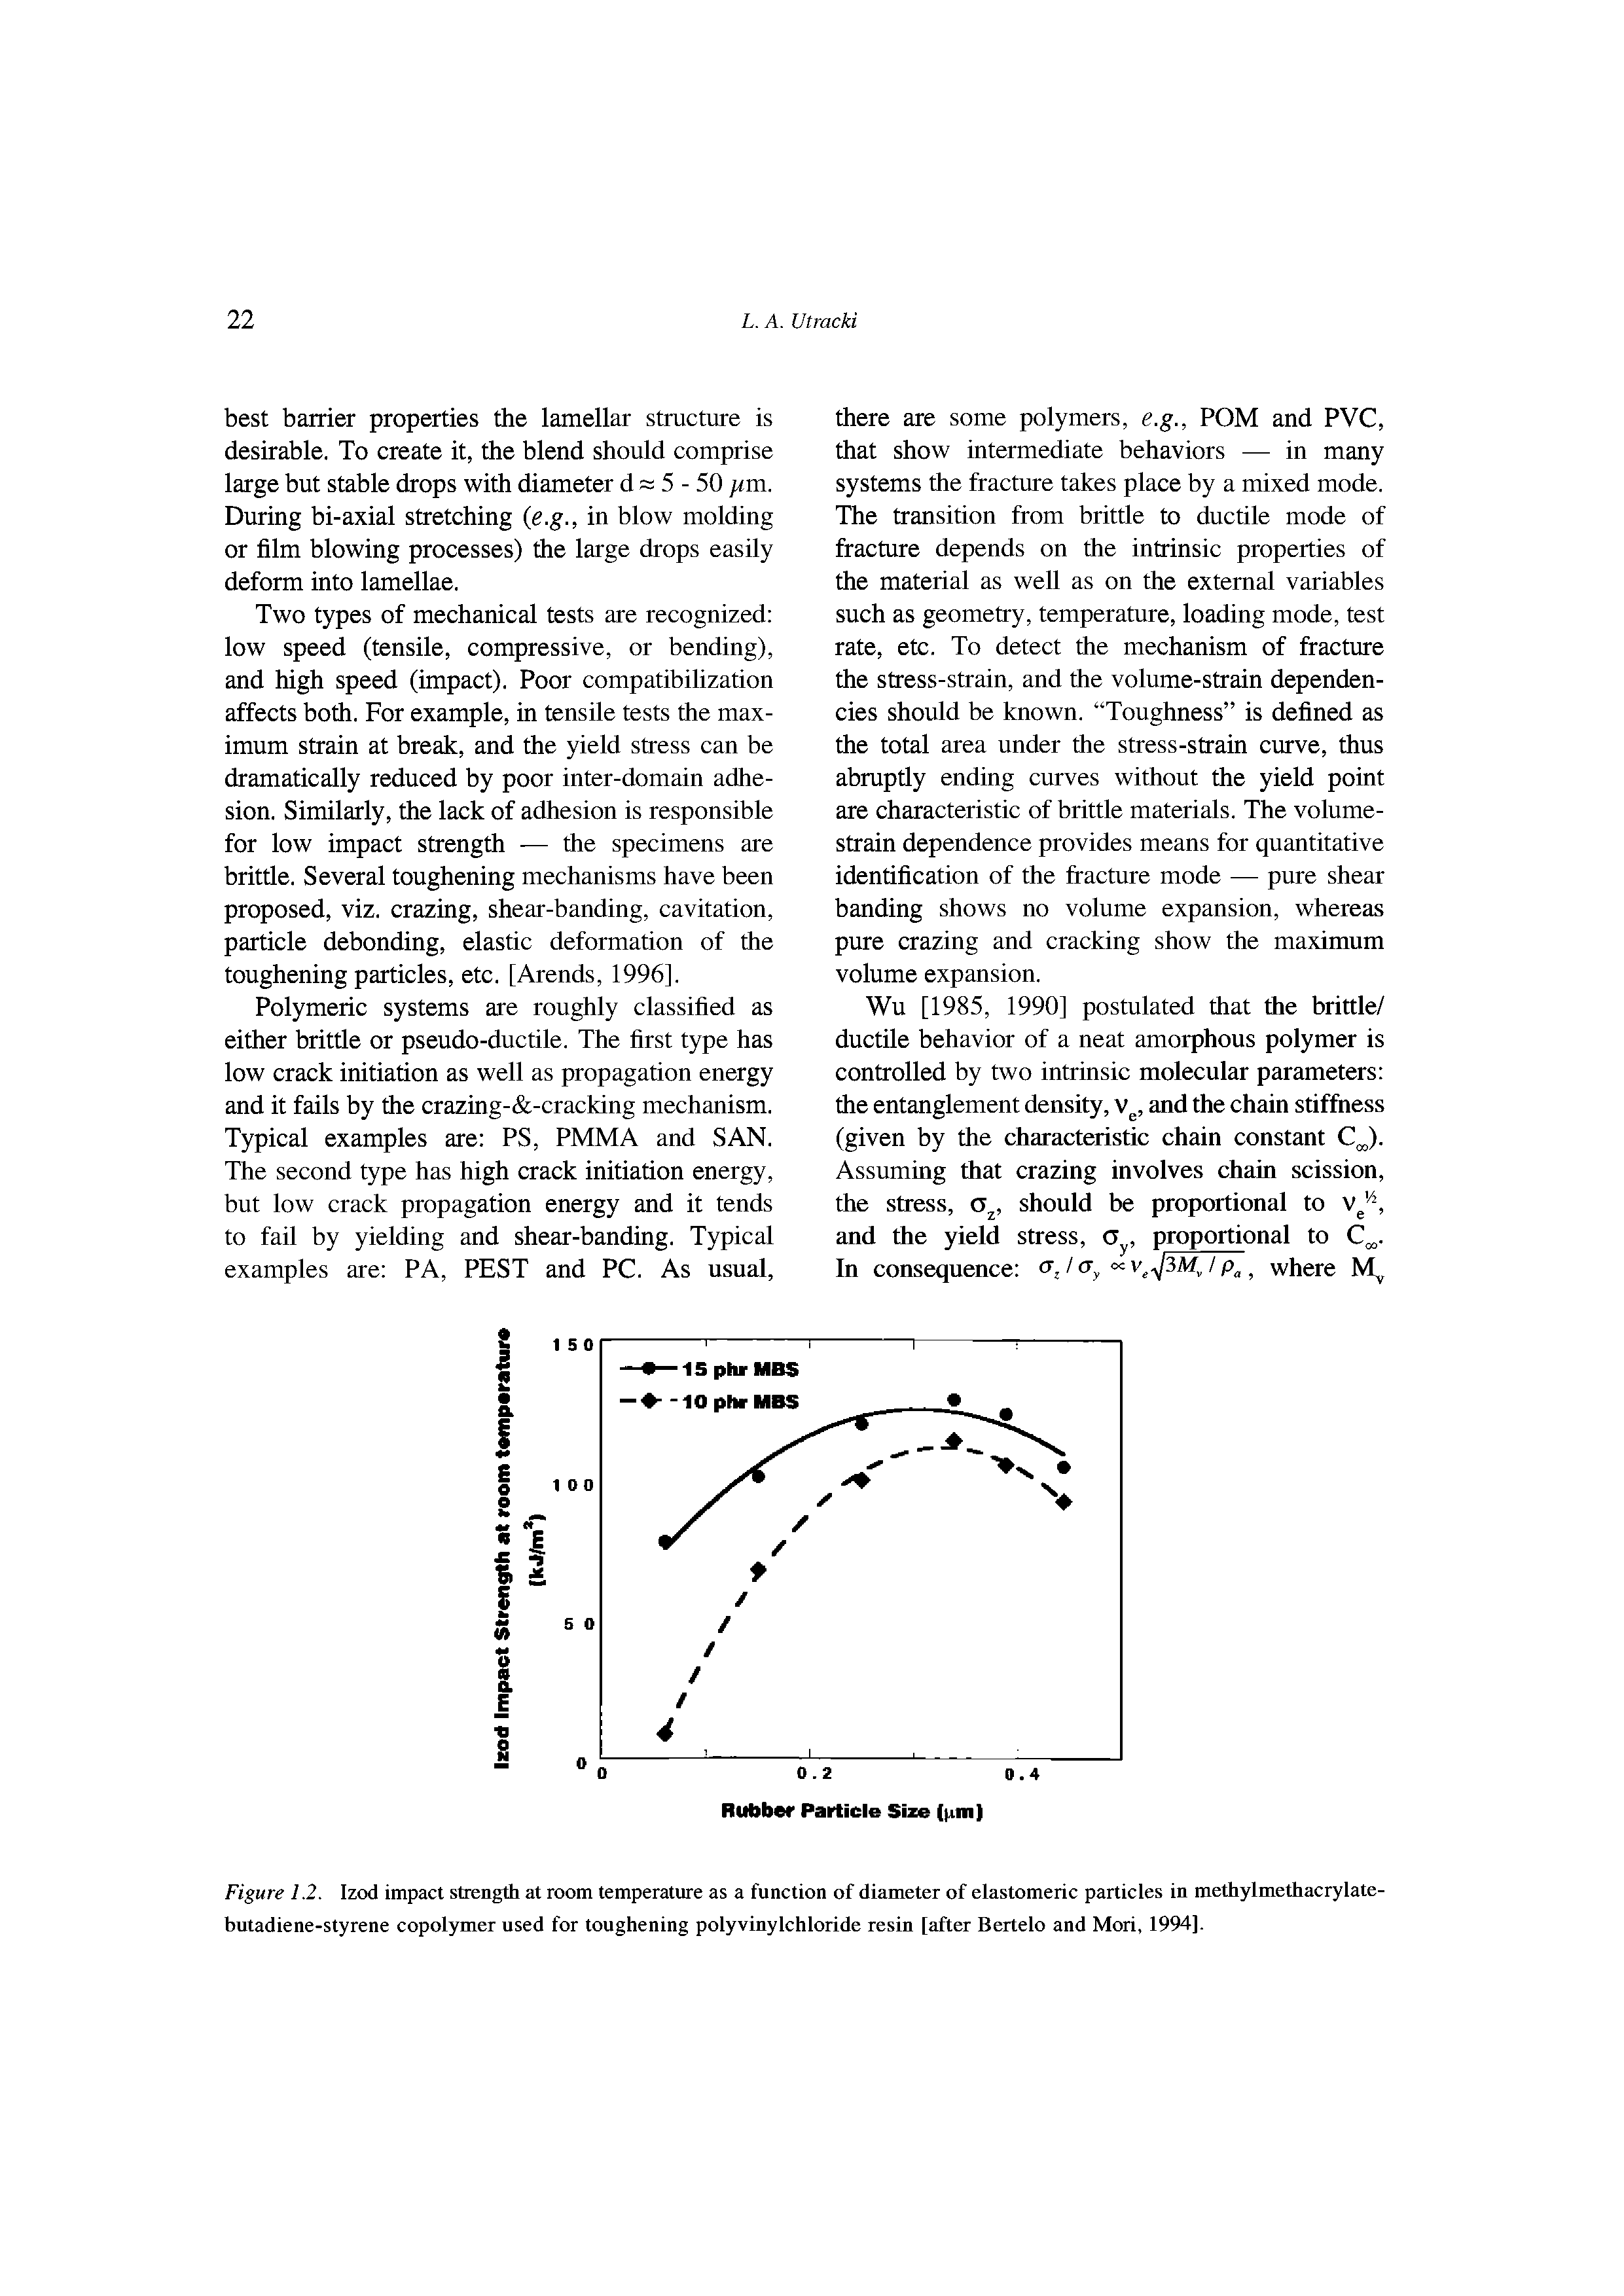 Figure 1.2. Izod impact strength at room temperature as a function of diameter of elastomeric particles in methylmethacrylate-butadiene-styrene copolymer used for toughening polyvinylchloride resin [after Bertelo and Mori, 1994].